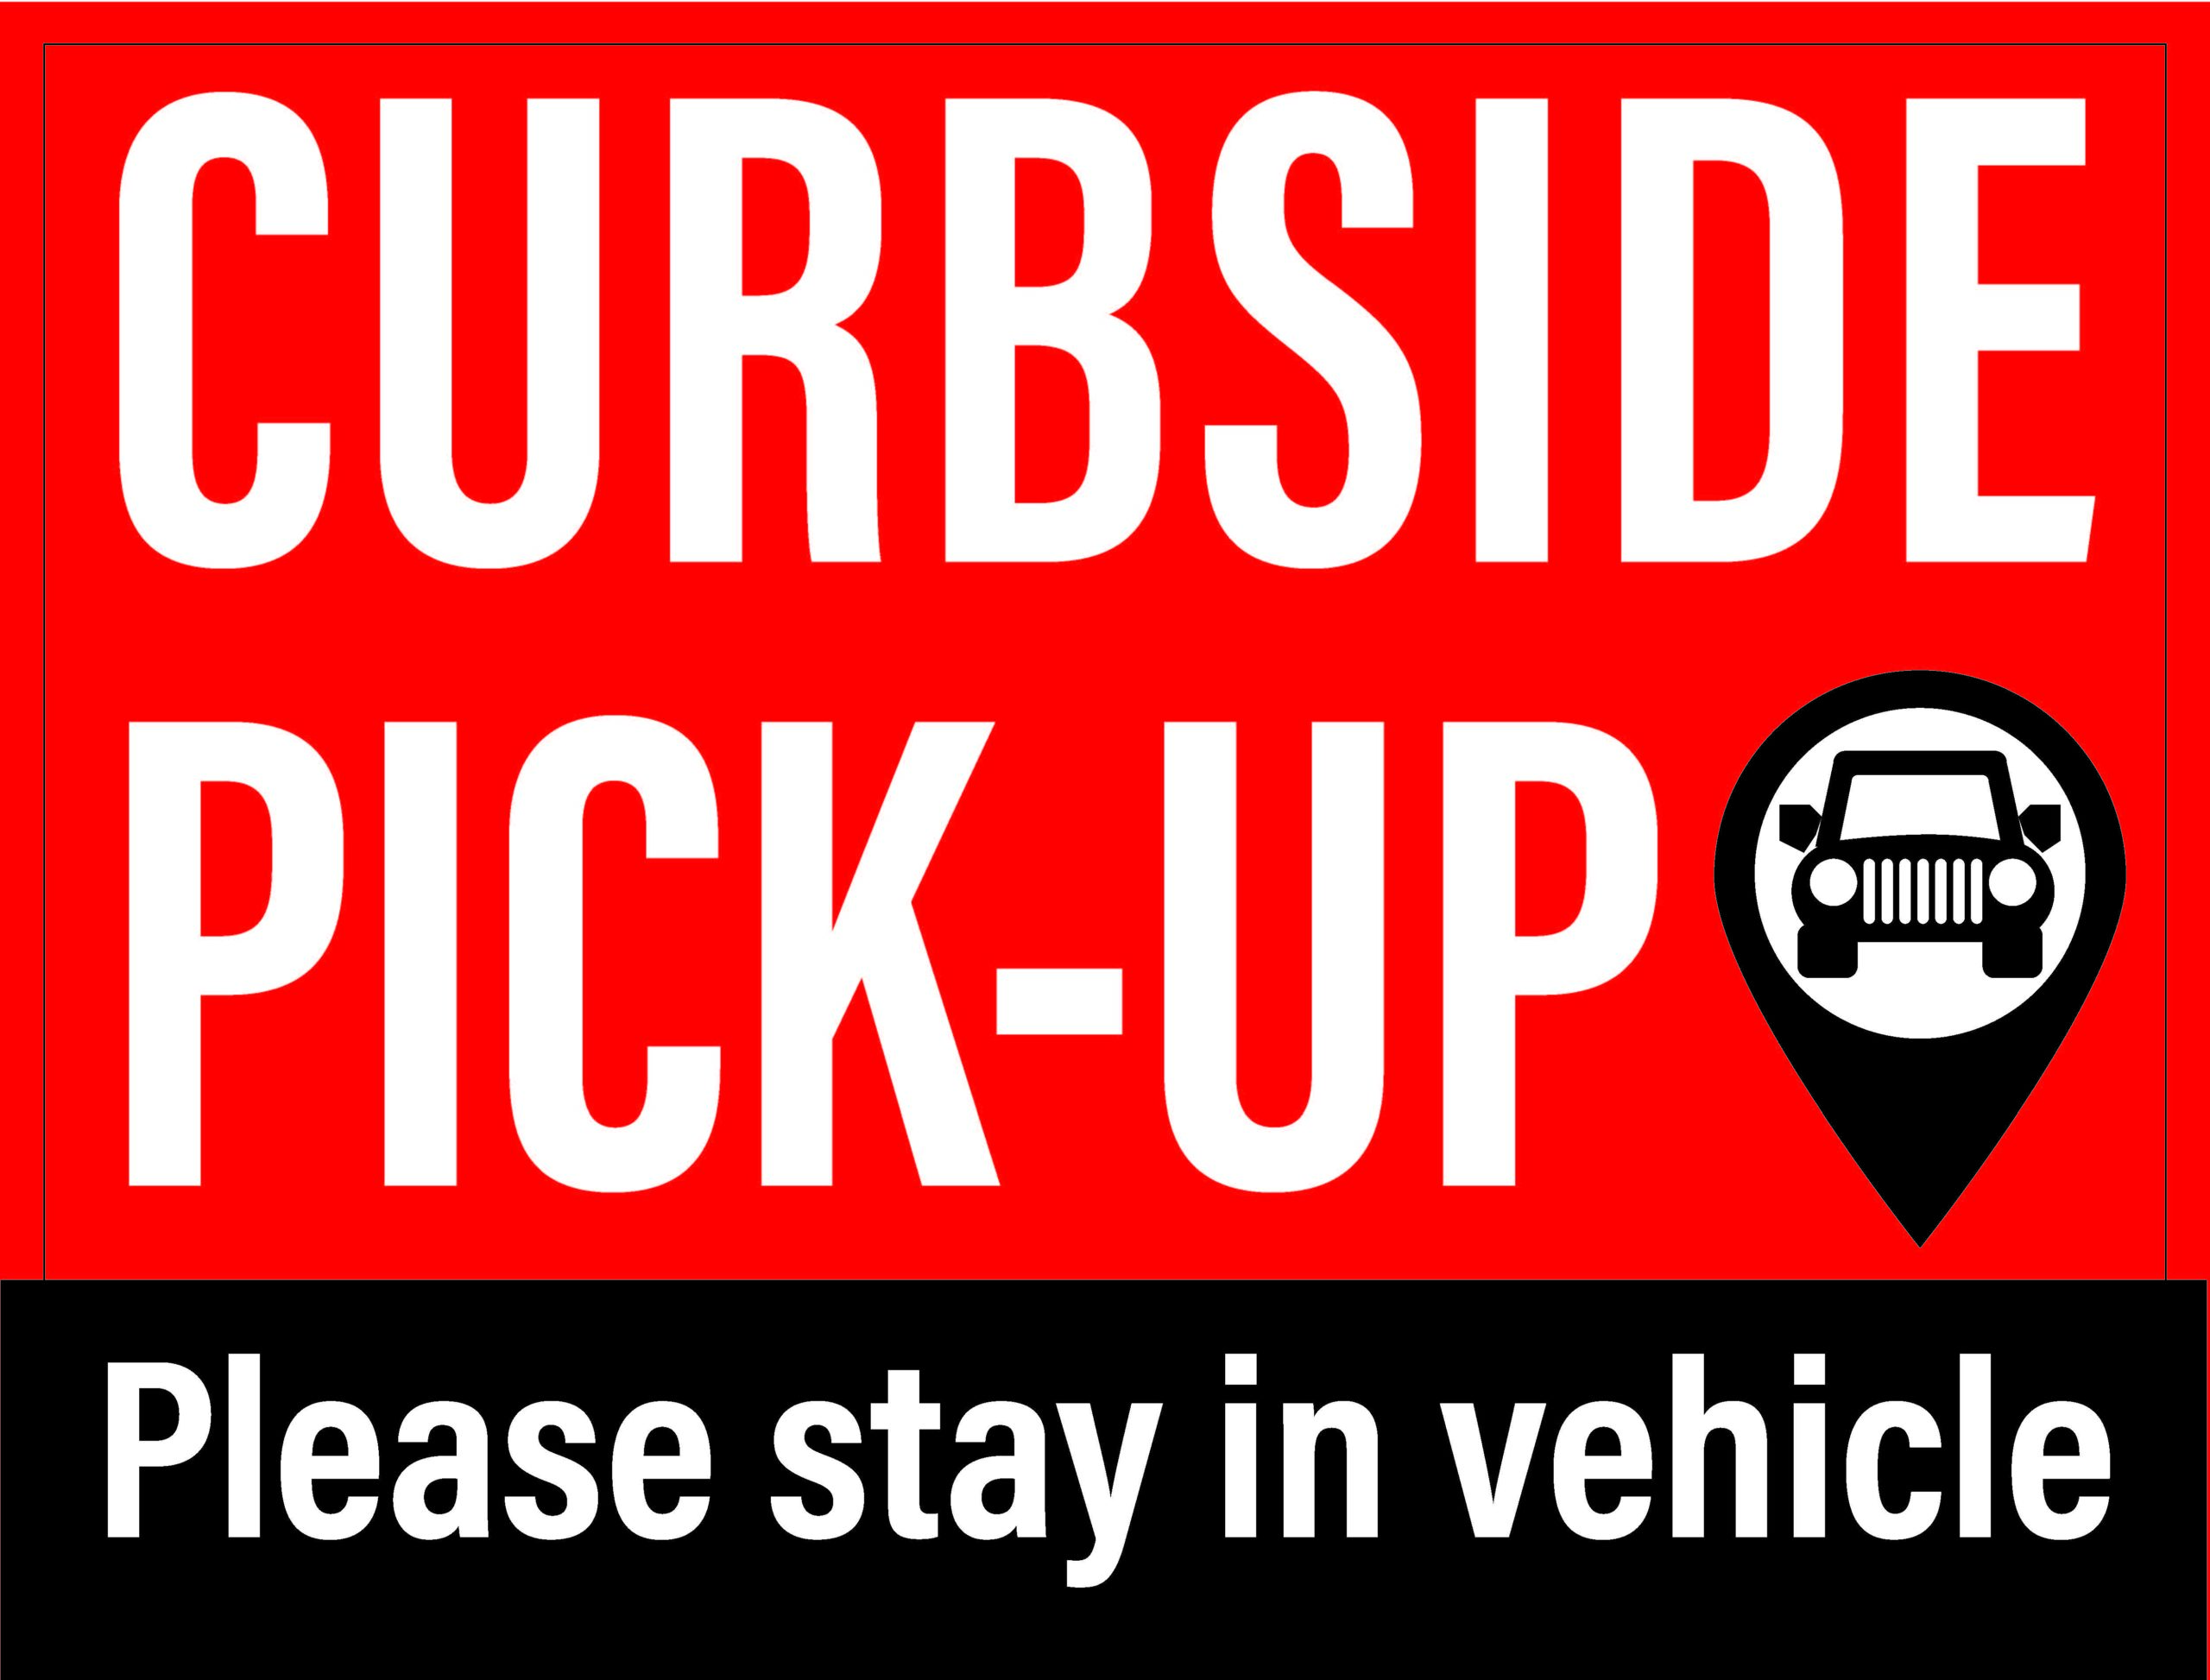 Curbside Pickup Signs Coroplast Single Sided 18x24" 